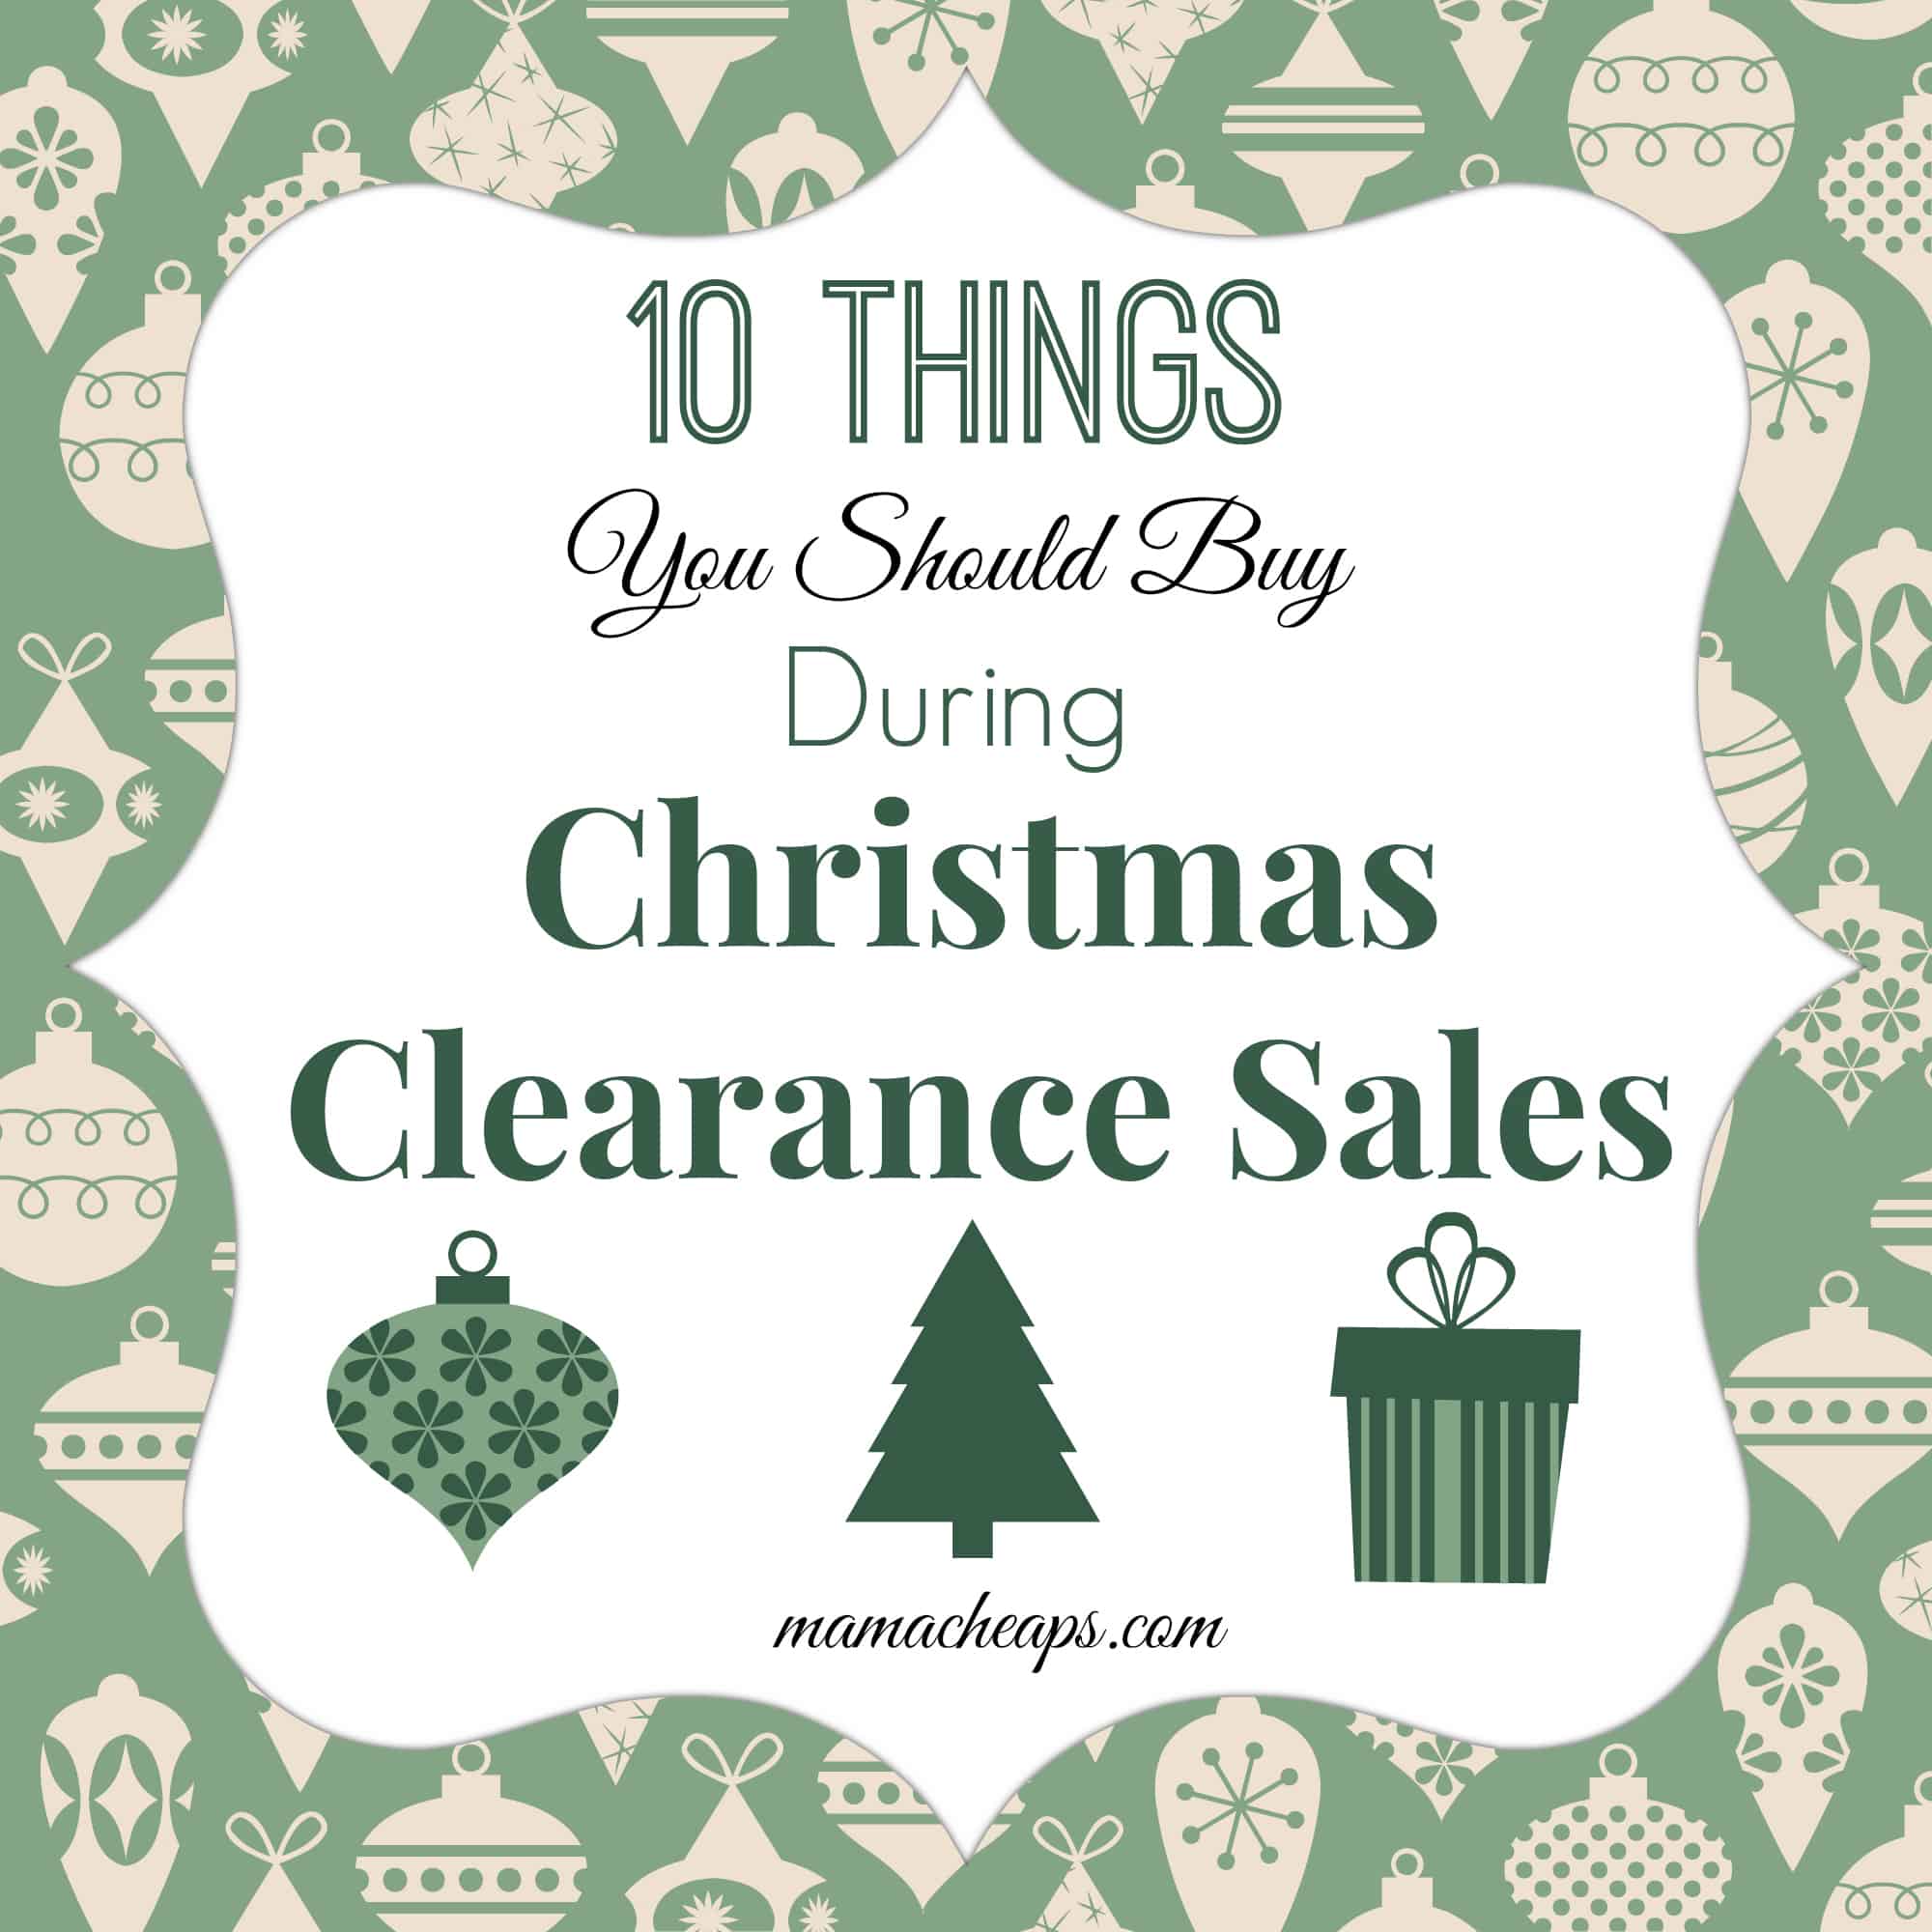 10 Things You Should Buy During Christmas Clearance Sales